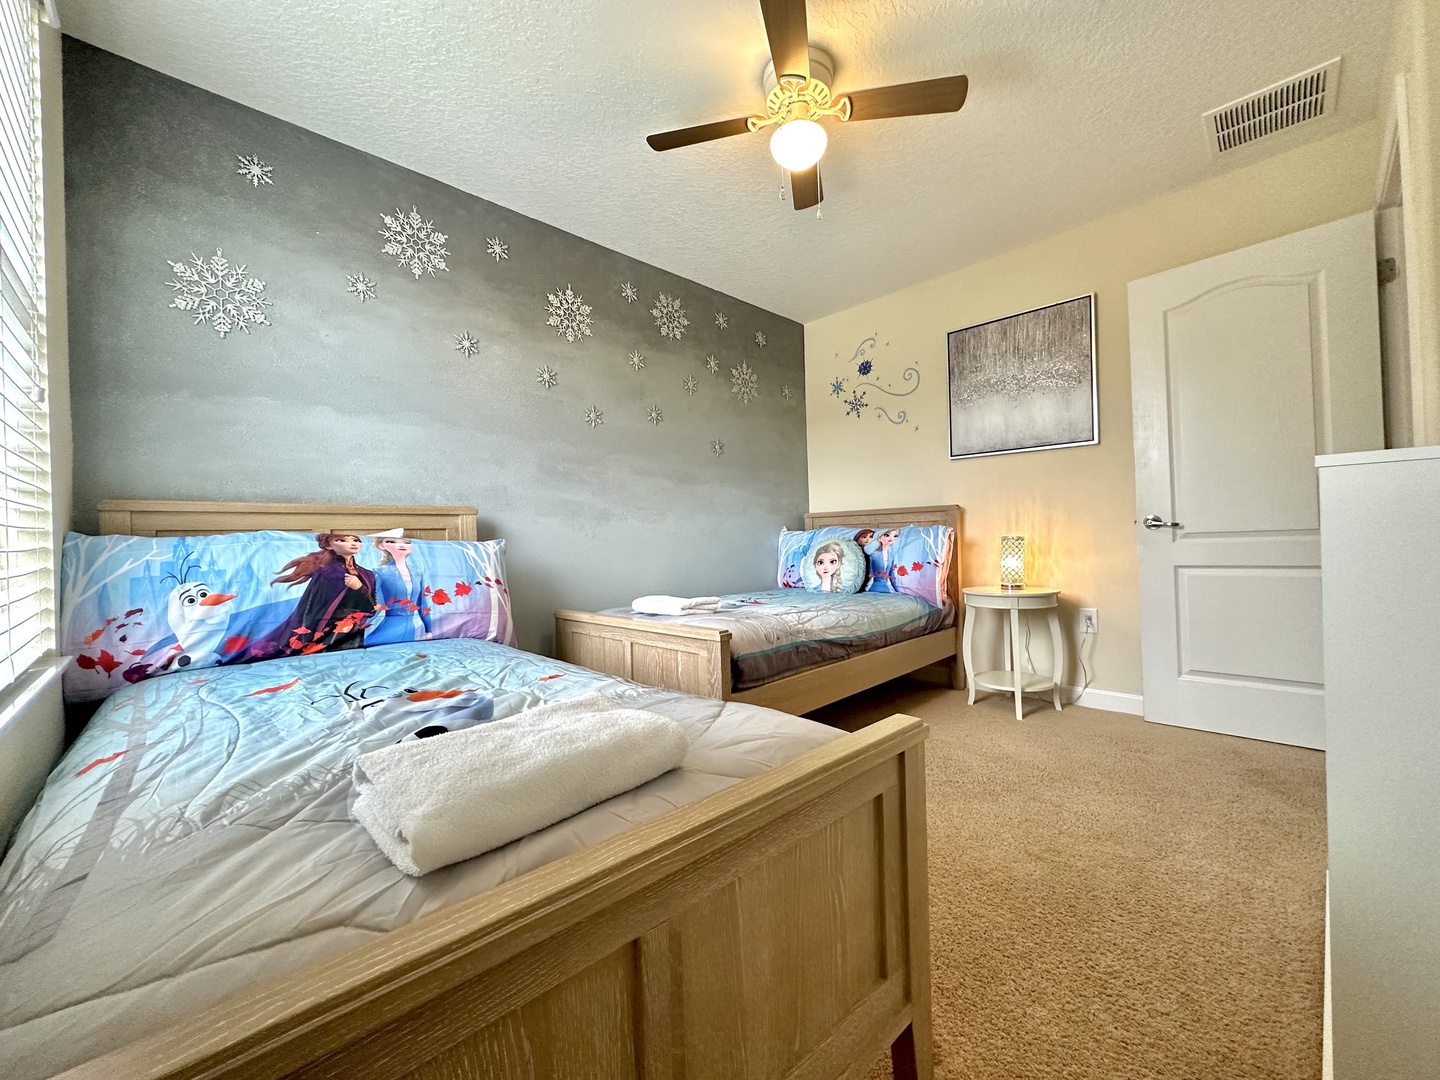 Frozen themed bedroom with 2 beds